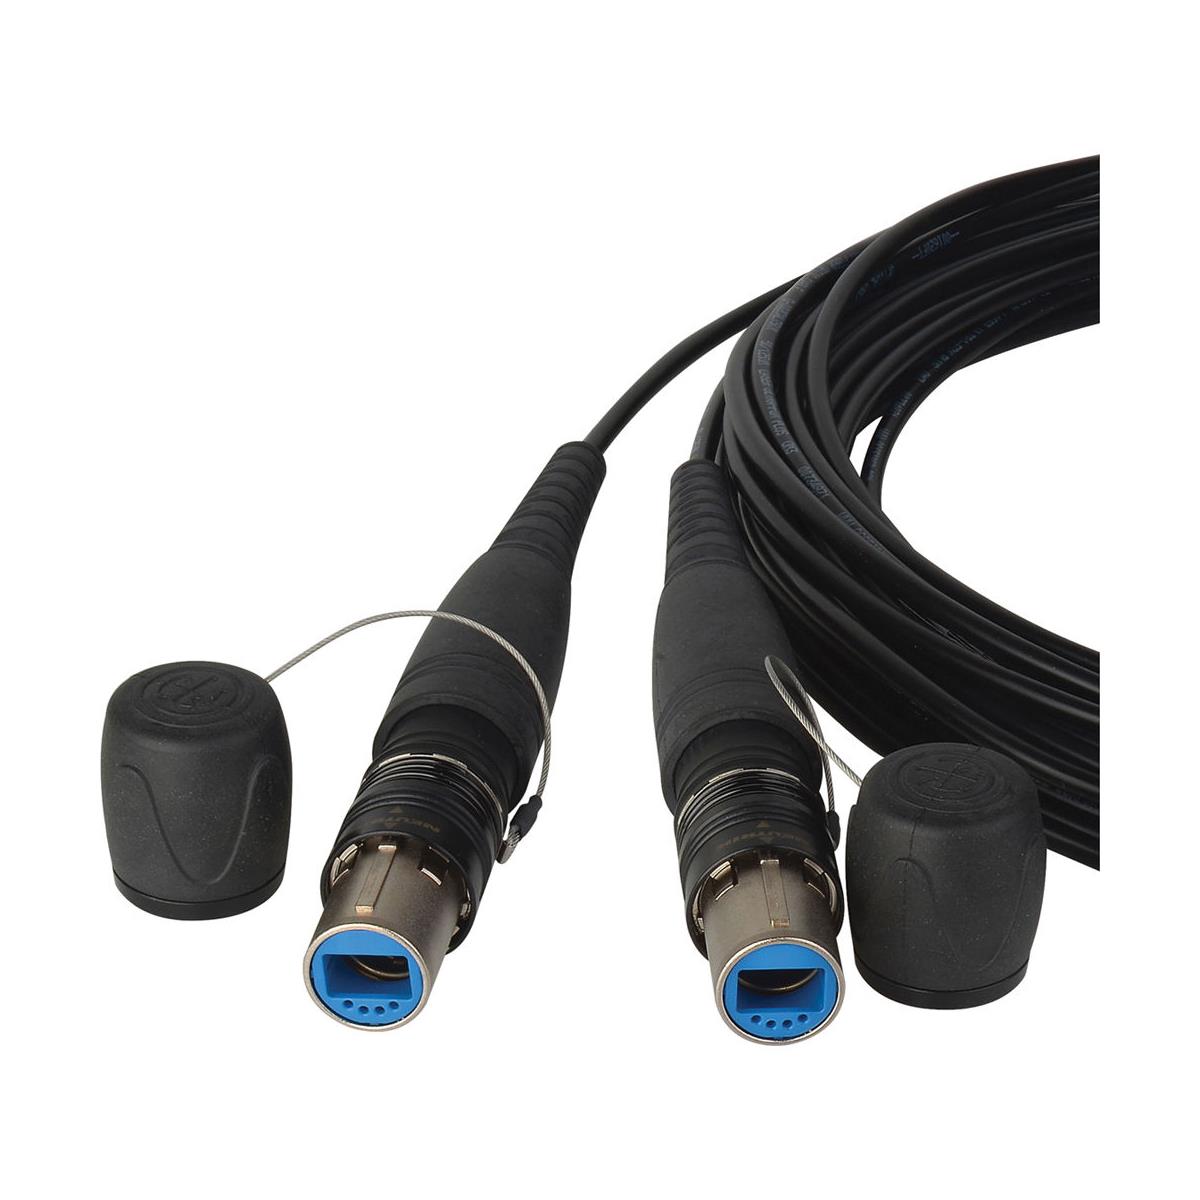 Image of Camplex opticalCON DUO to DUO Singlemode Fiber Optic Tactical Cable